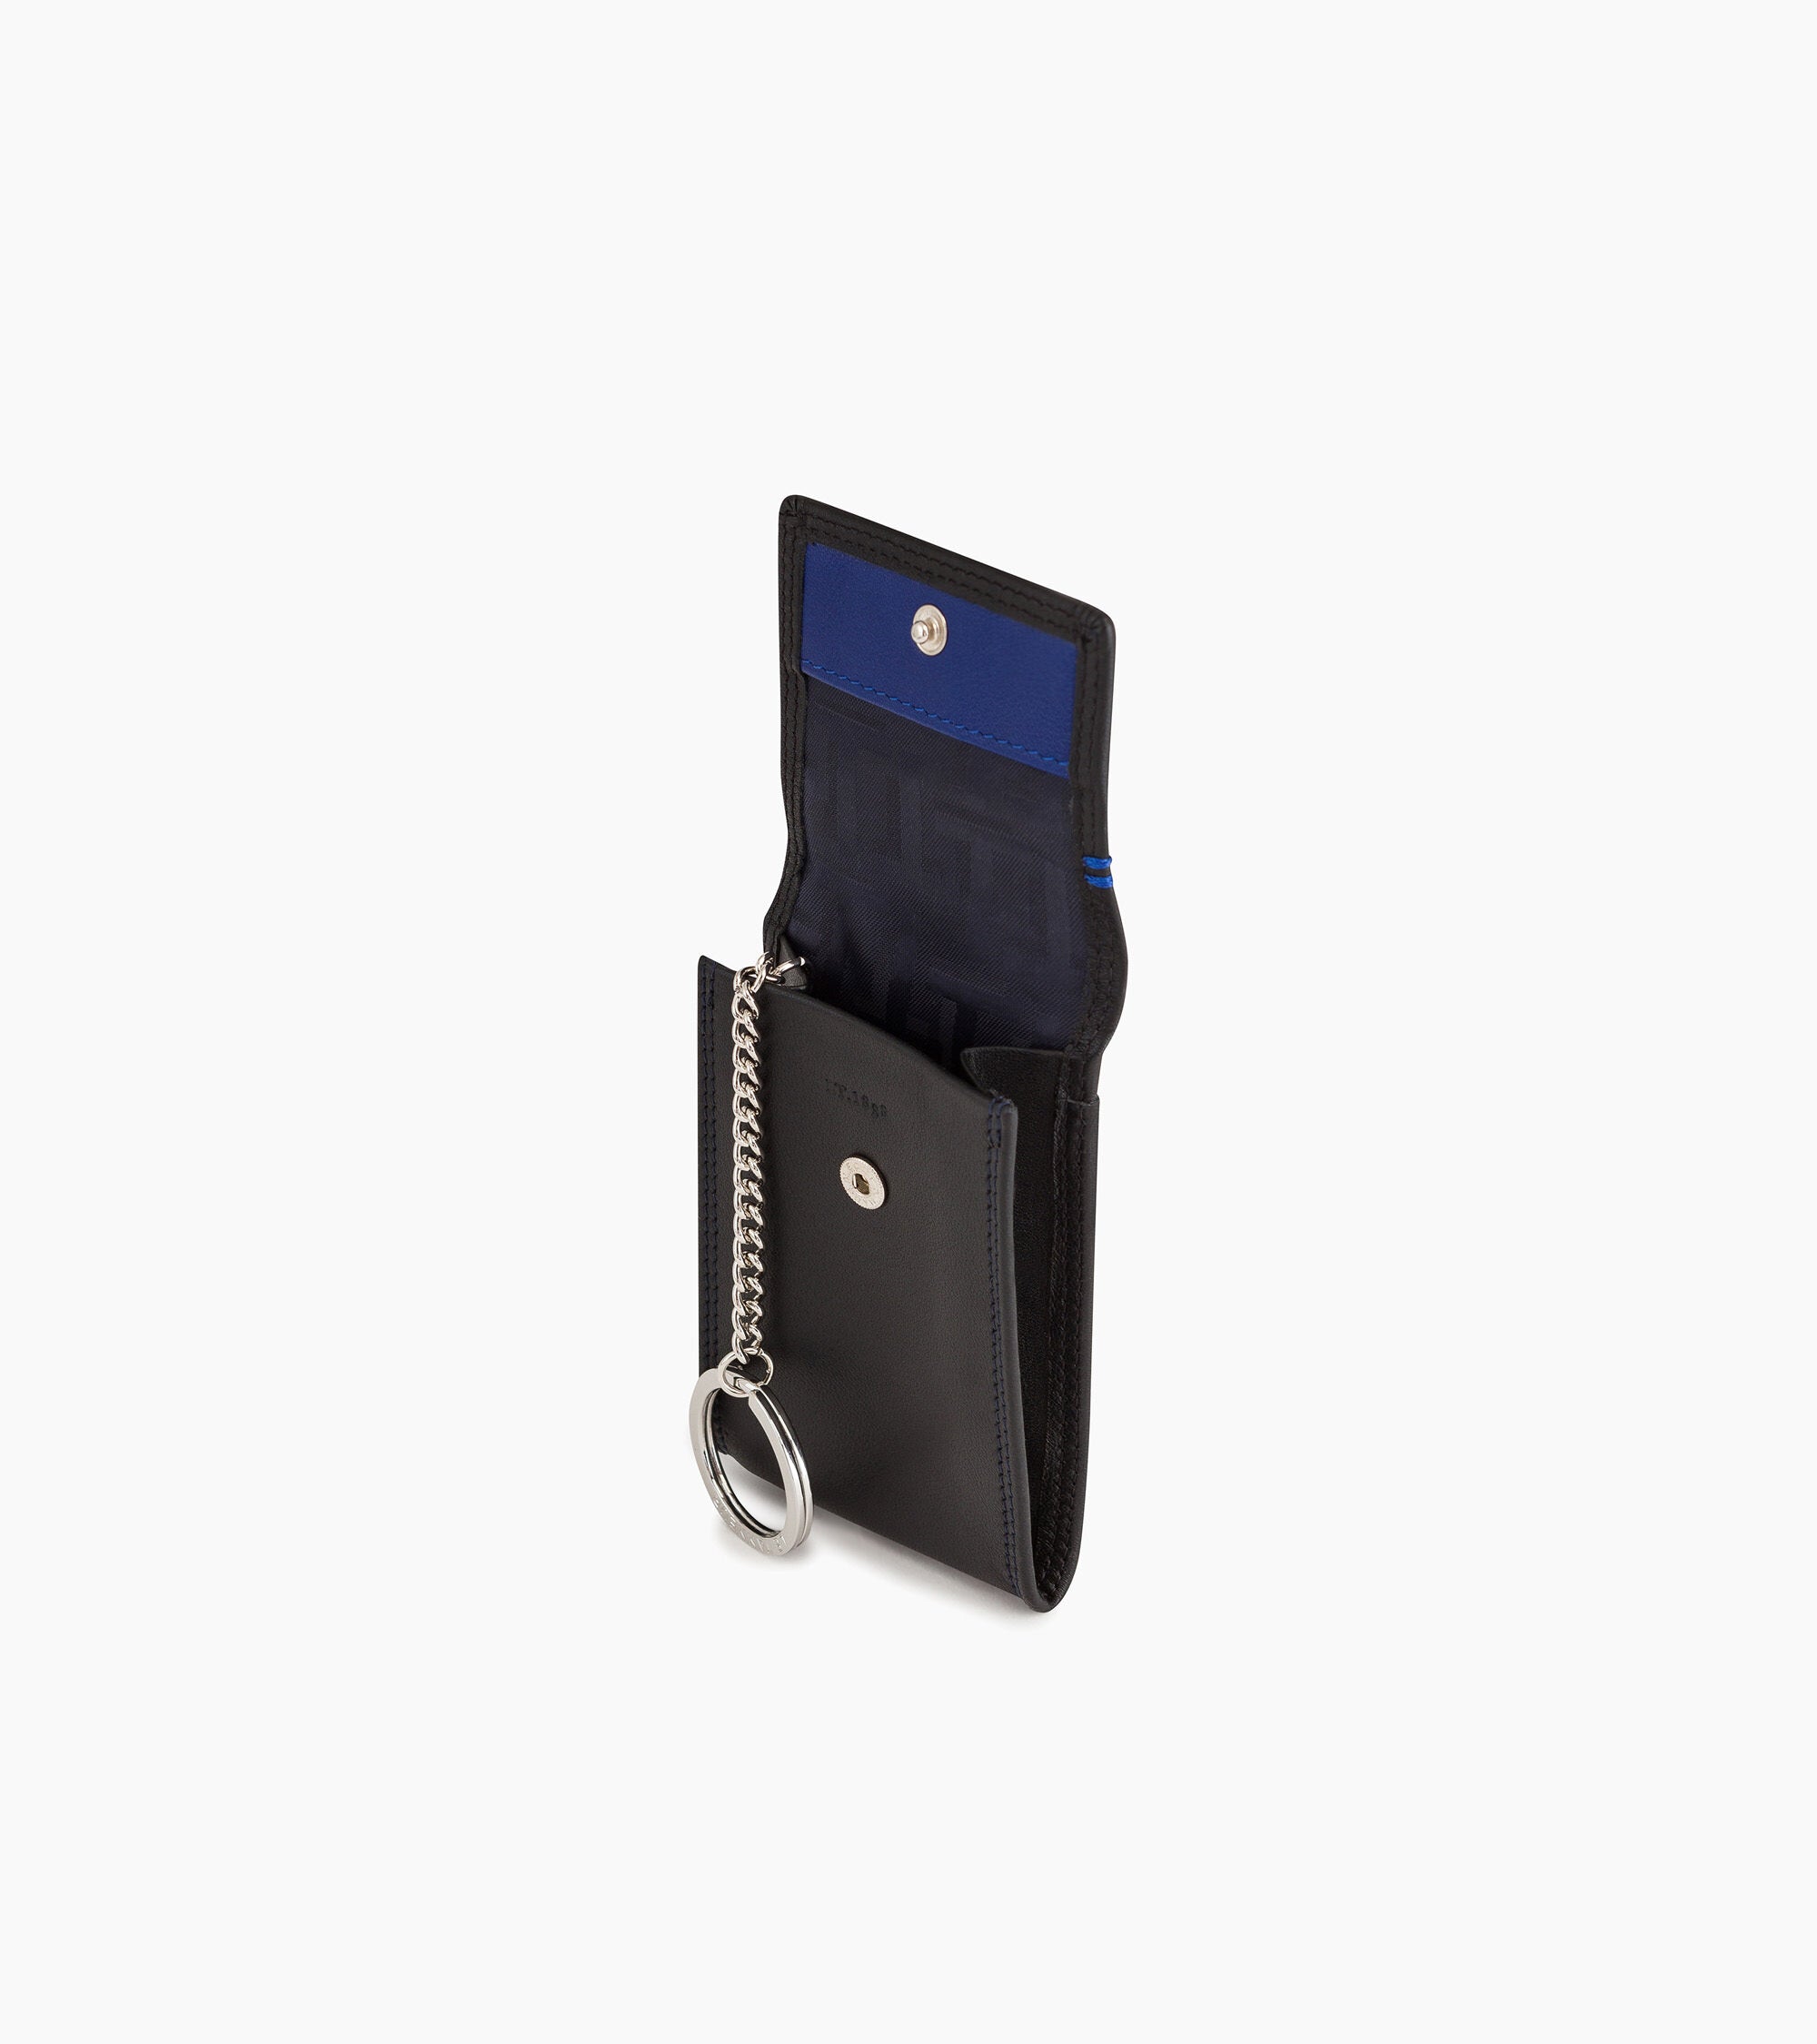 Flap Martin smooth leather key case